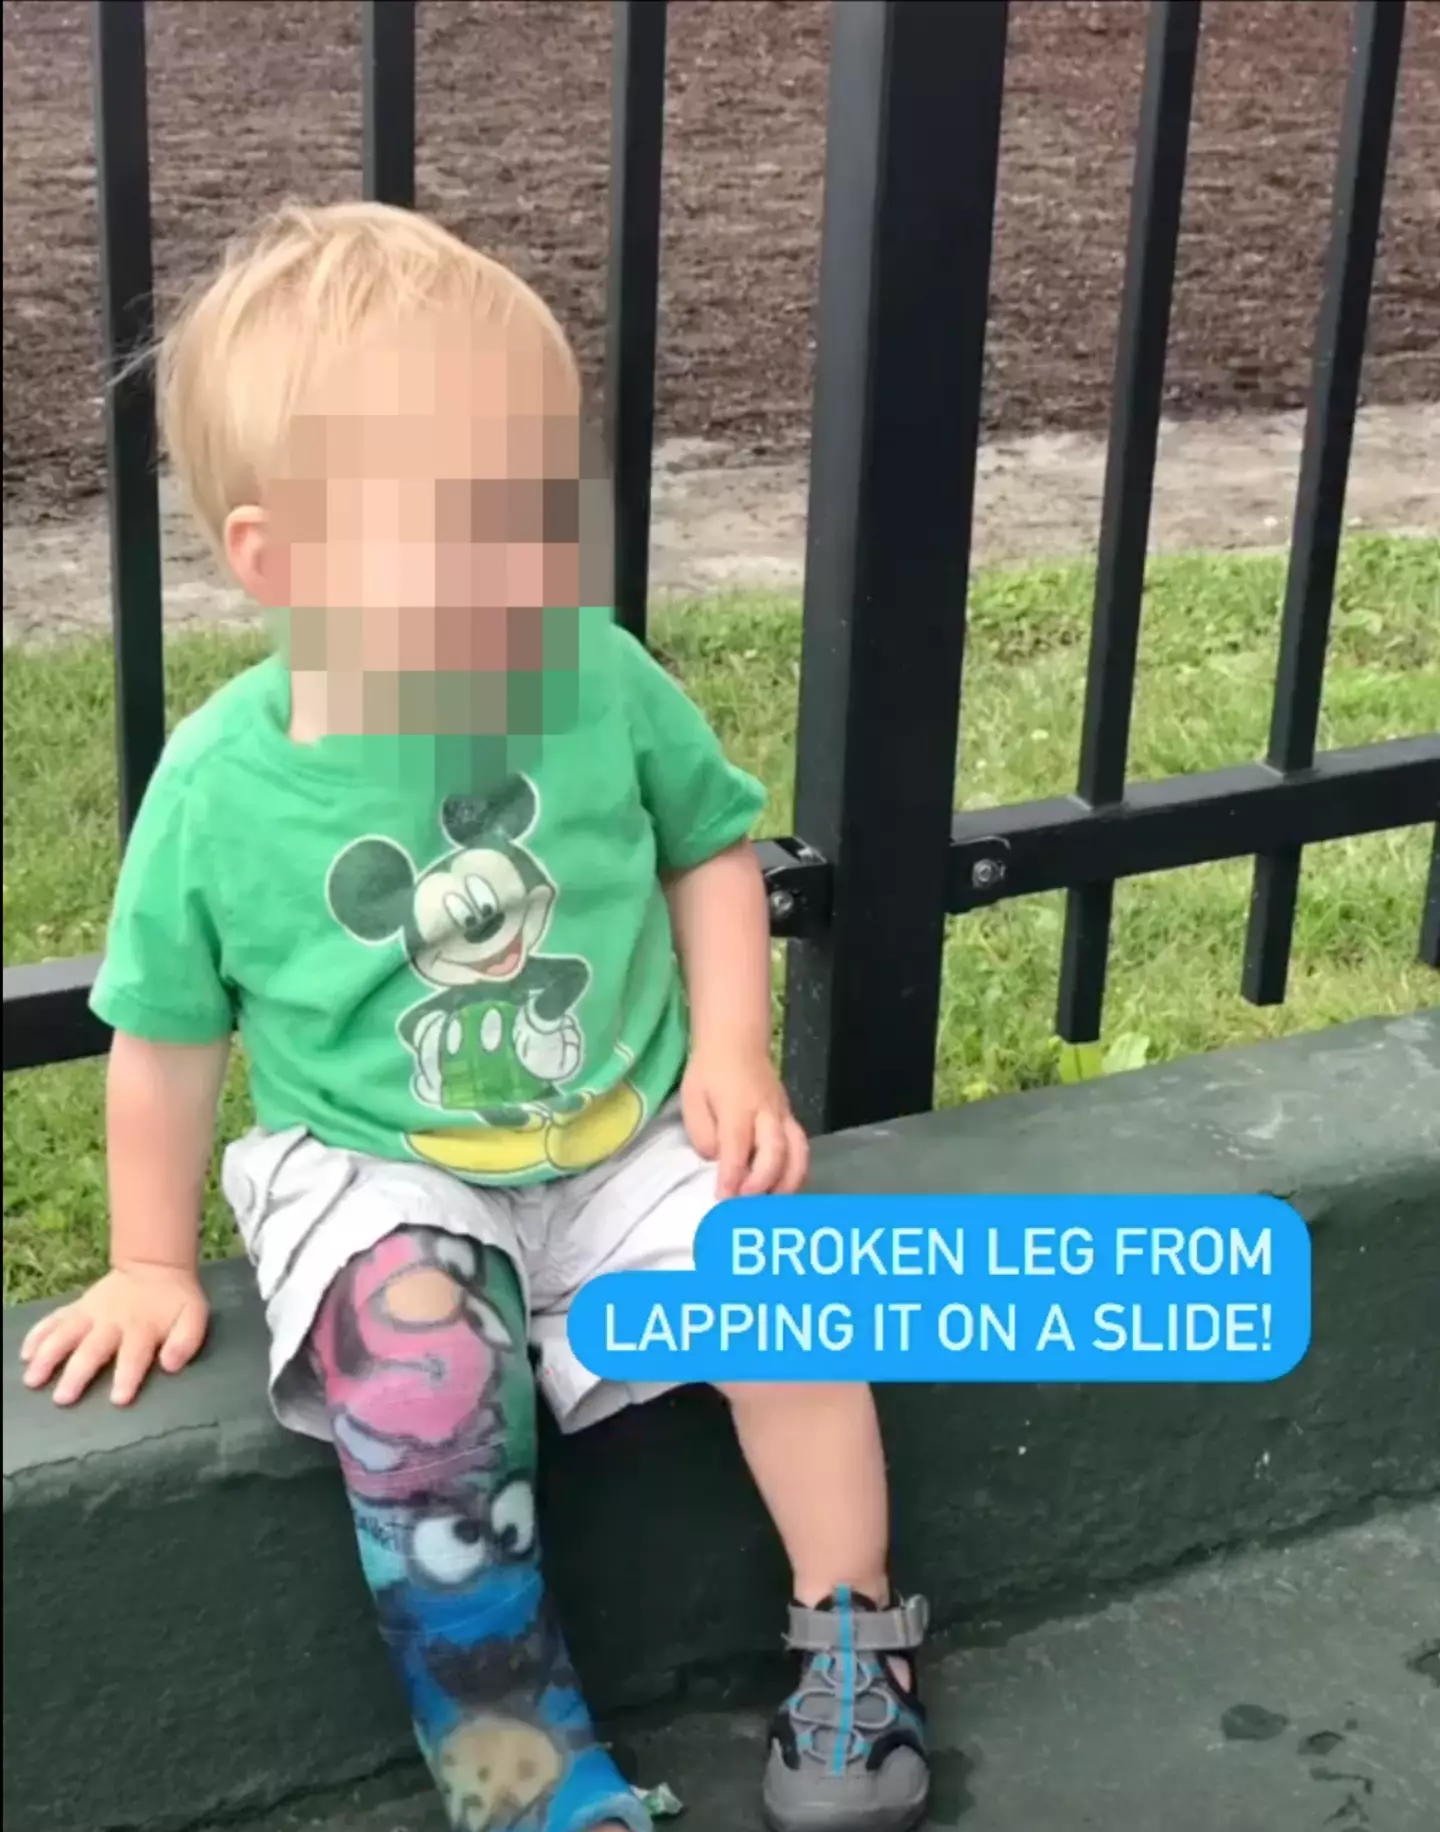 A mum issued a warning about slides. (